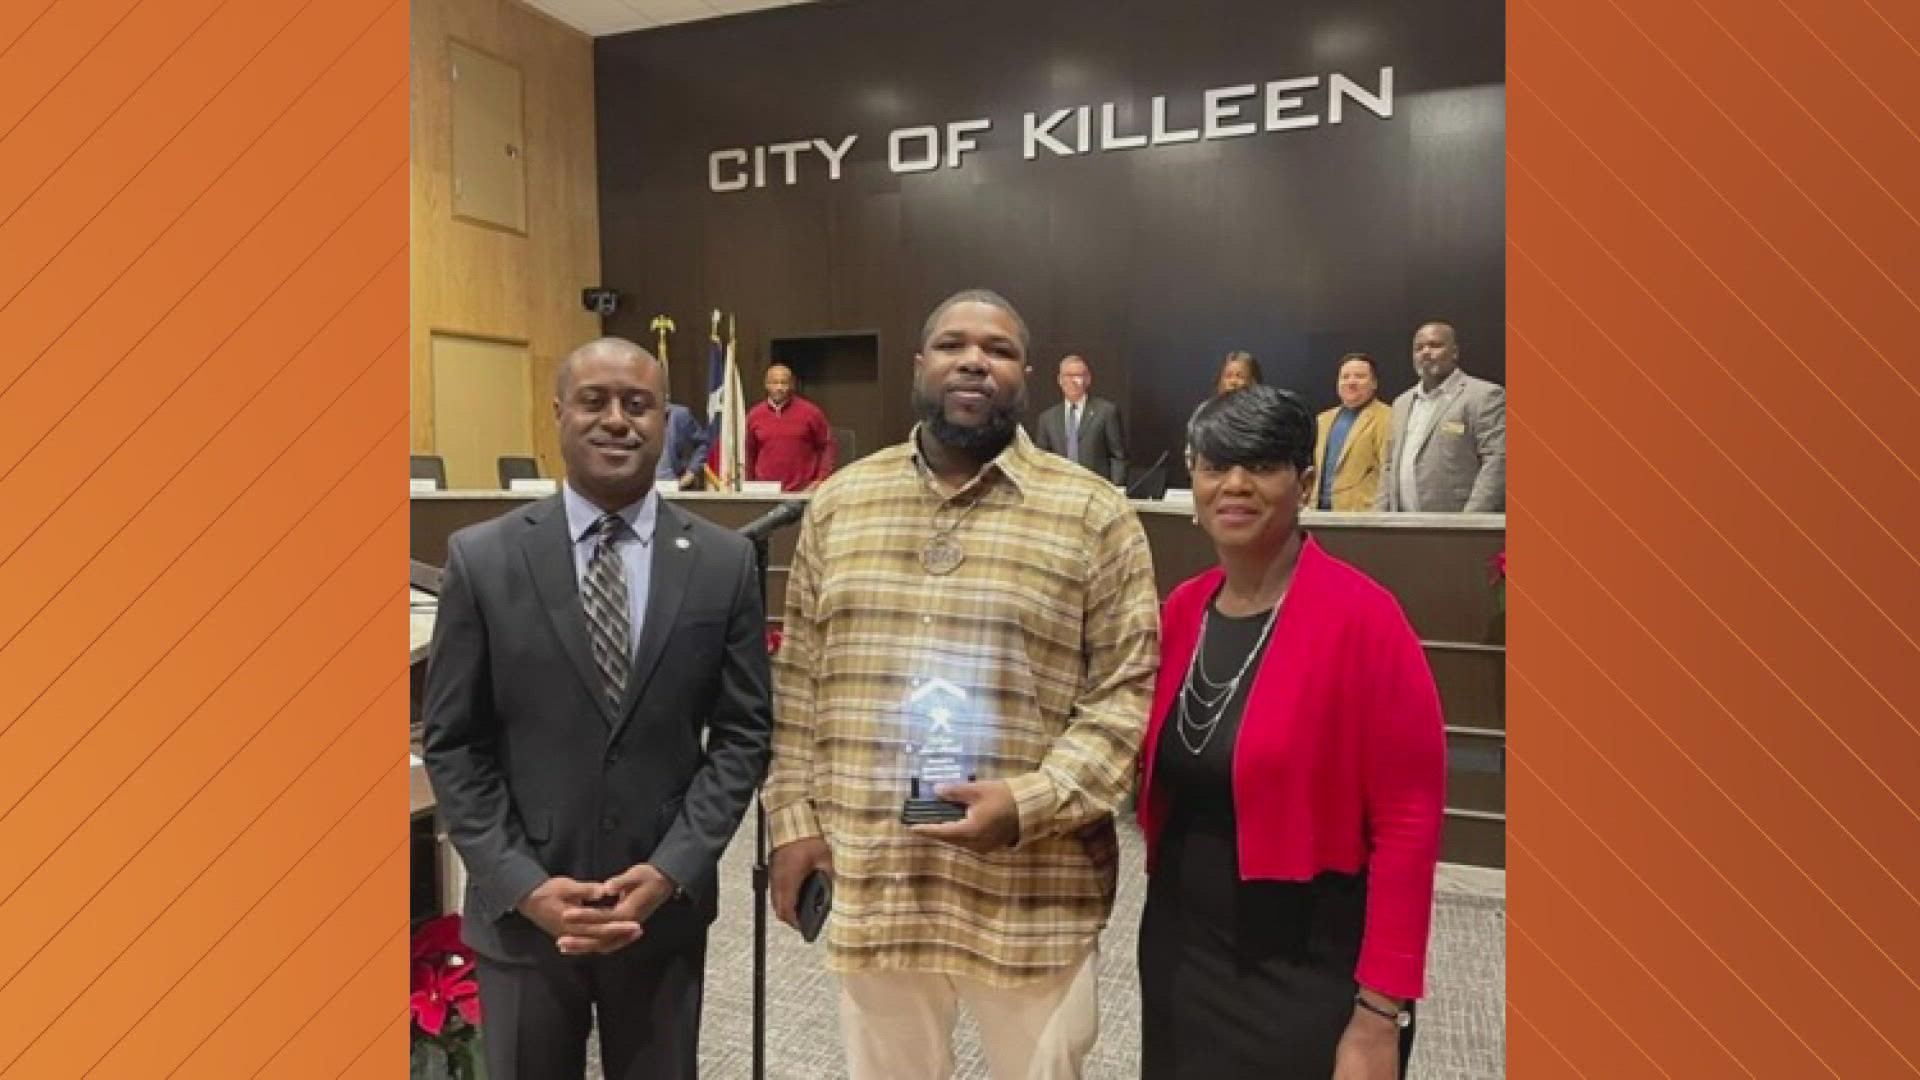 The city recognized owner and chef Brandon Martin of Krab Kingz for his hard work and leadership in the community.